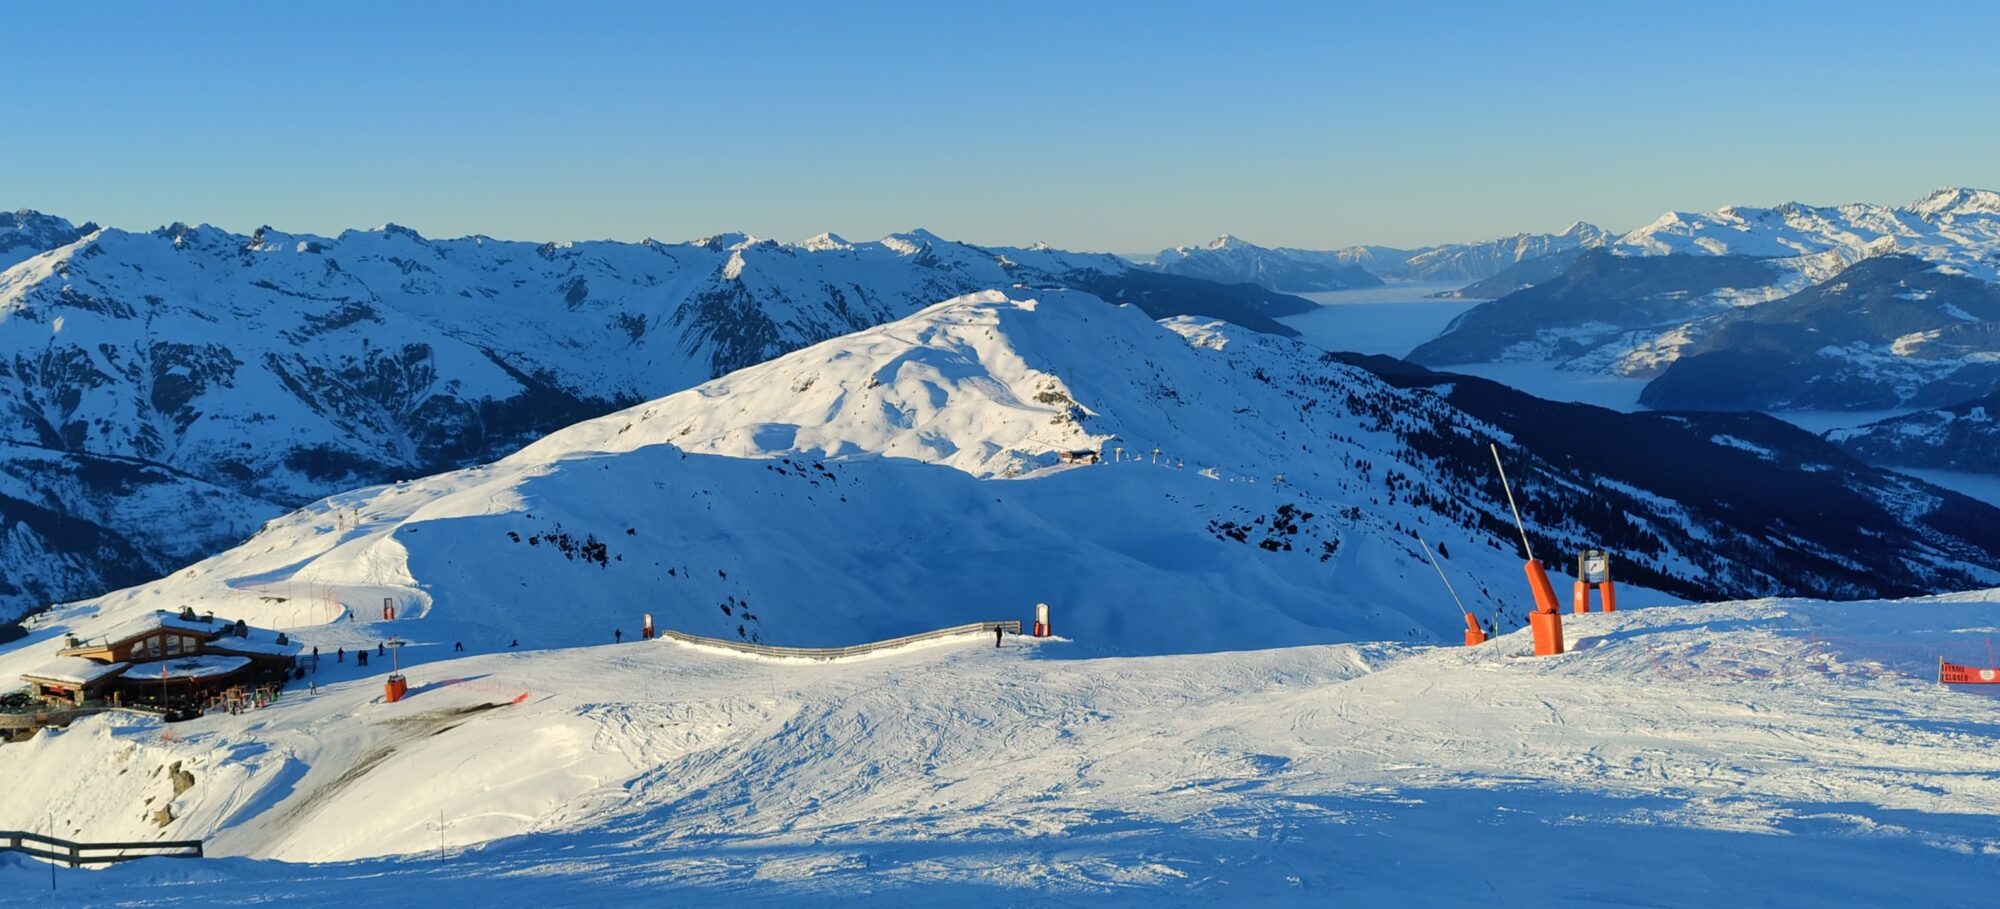 local pistes in saint martin make for some of the best skiing in france